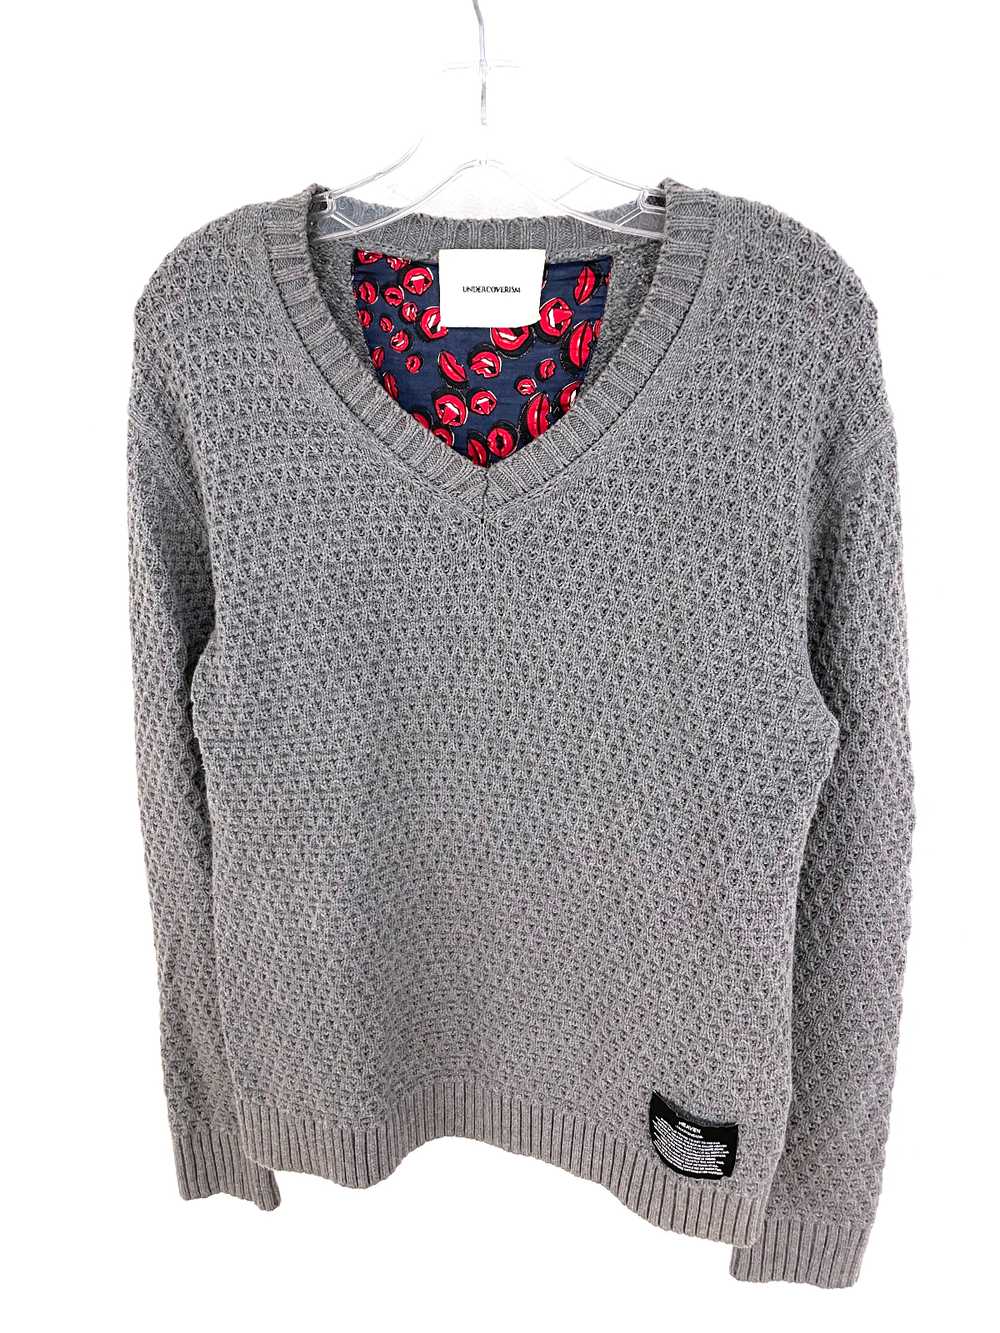 UNDERCOVER SS13 Heaven Talking Heads Sweater - image 2